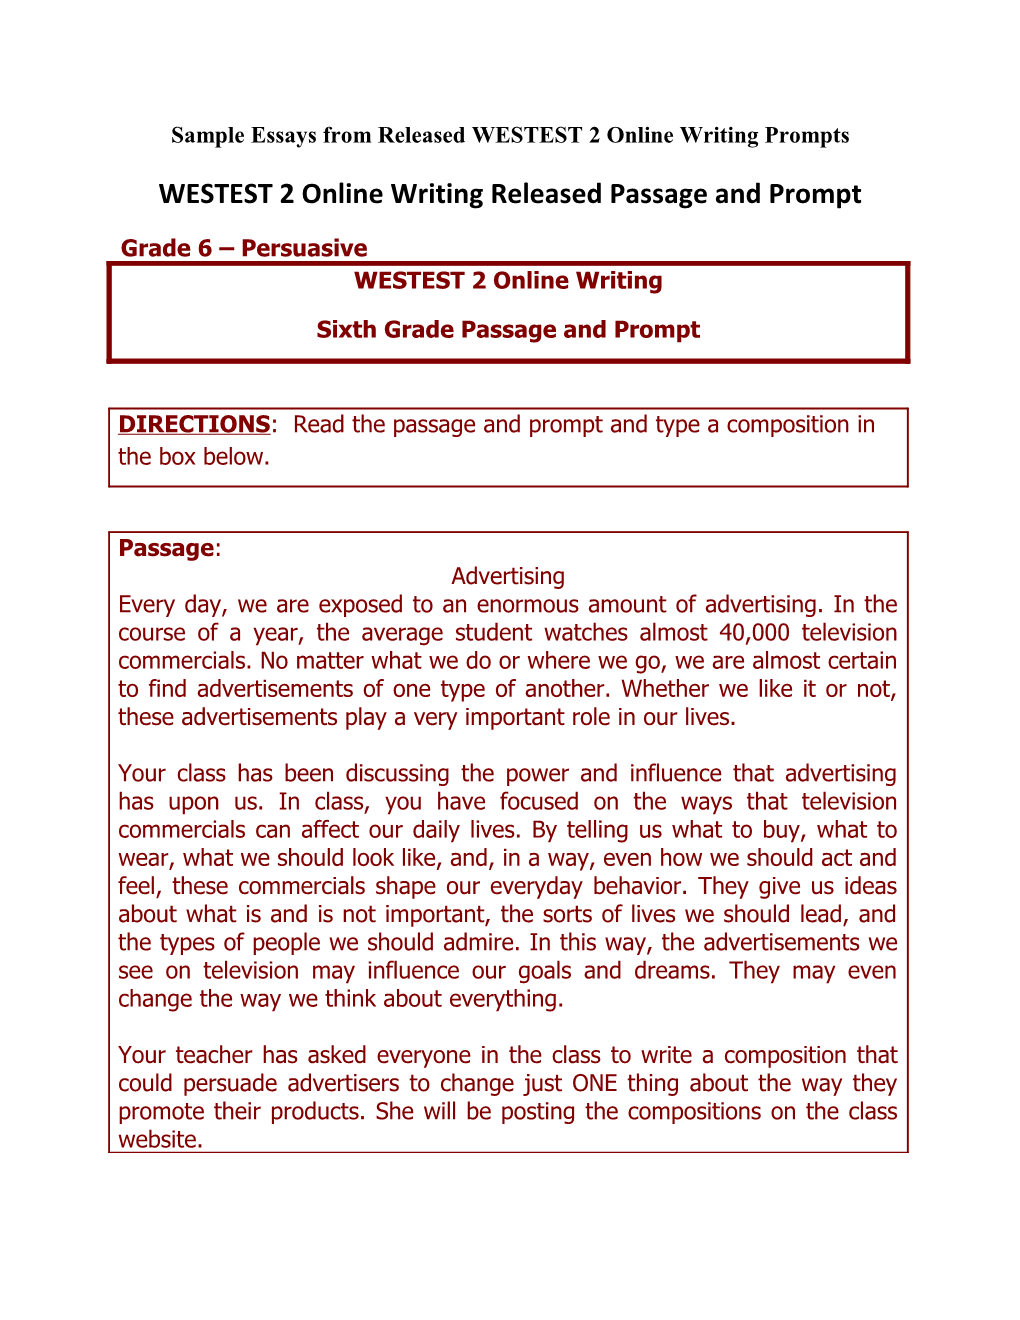 Sample Essays from Released WESTEST 2 Online Writing Prompts